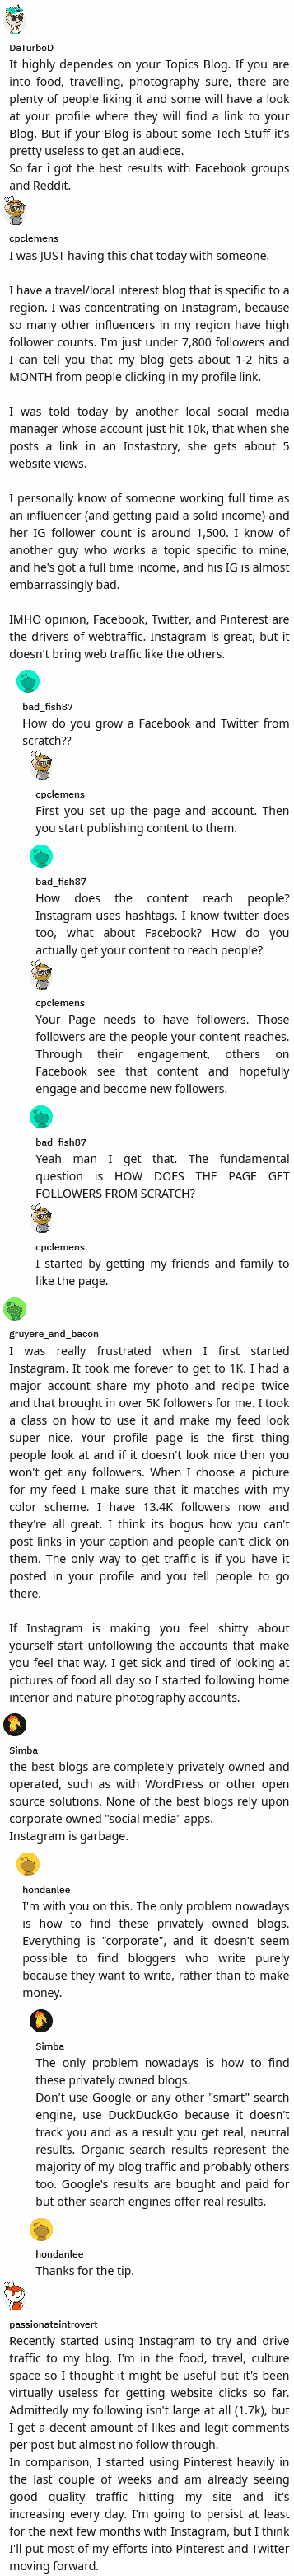 to convert some instagram followers into blog traffic